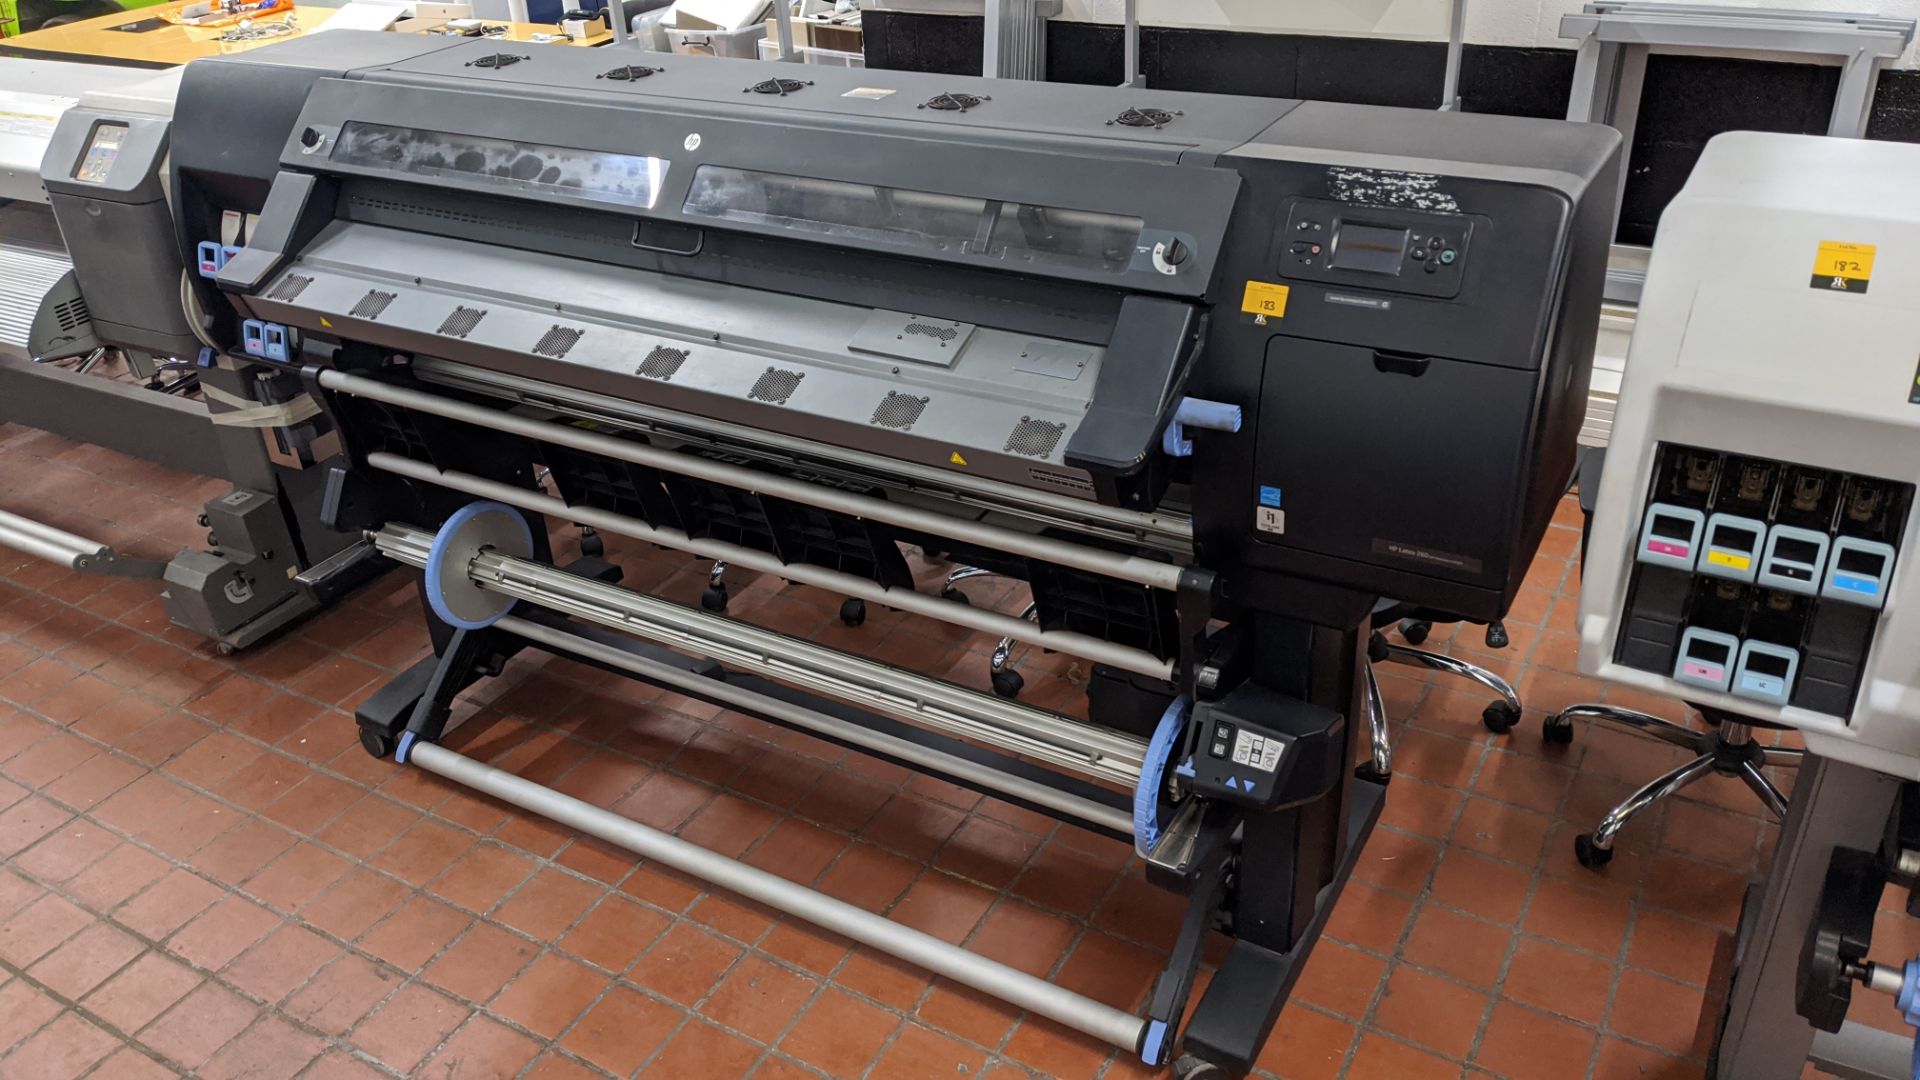 HP latex 260 (HP DesignJet L26500) wide format printer, product number CQ869A (61" capacity). - Image 8 of 9